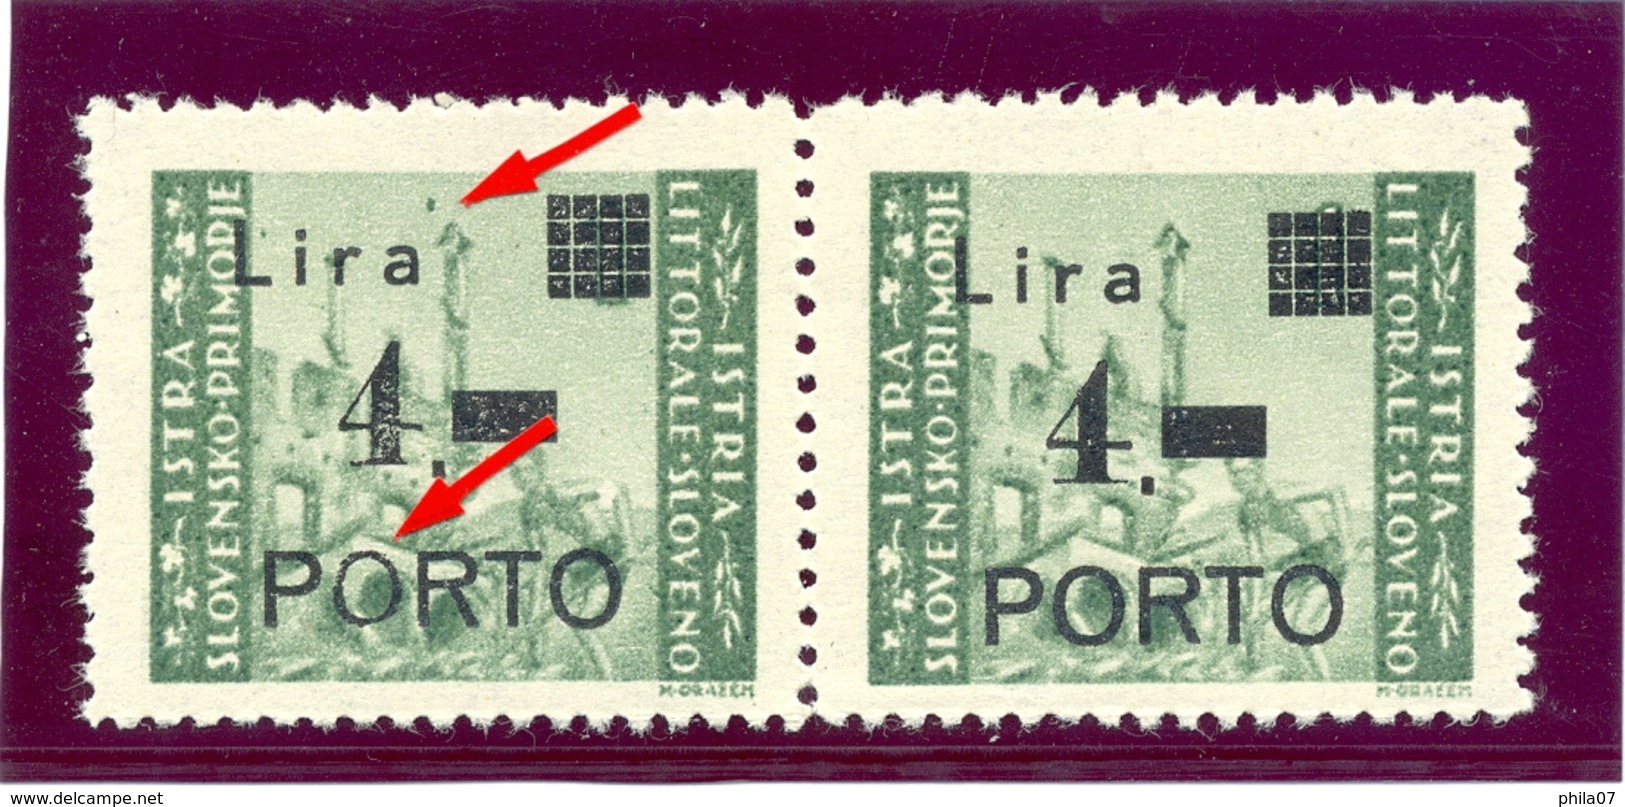 Italy, Yugoslavia - PS No. 10, Type Ia And Error Of Overprint, Thin O In PORTO And Dot Above Tower, Novakovic. - Occ. Yougoslave: Littoral Slovène